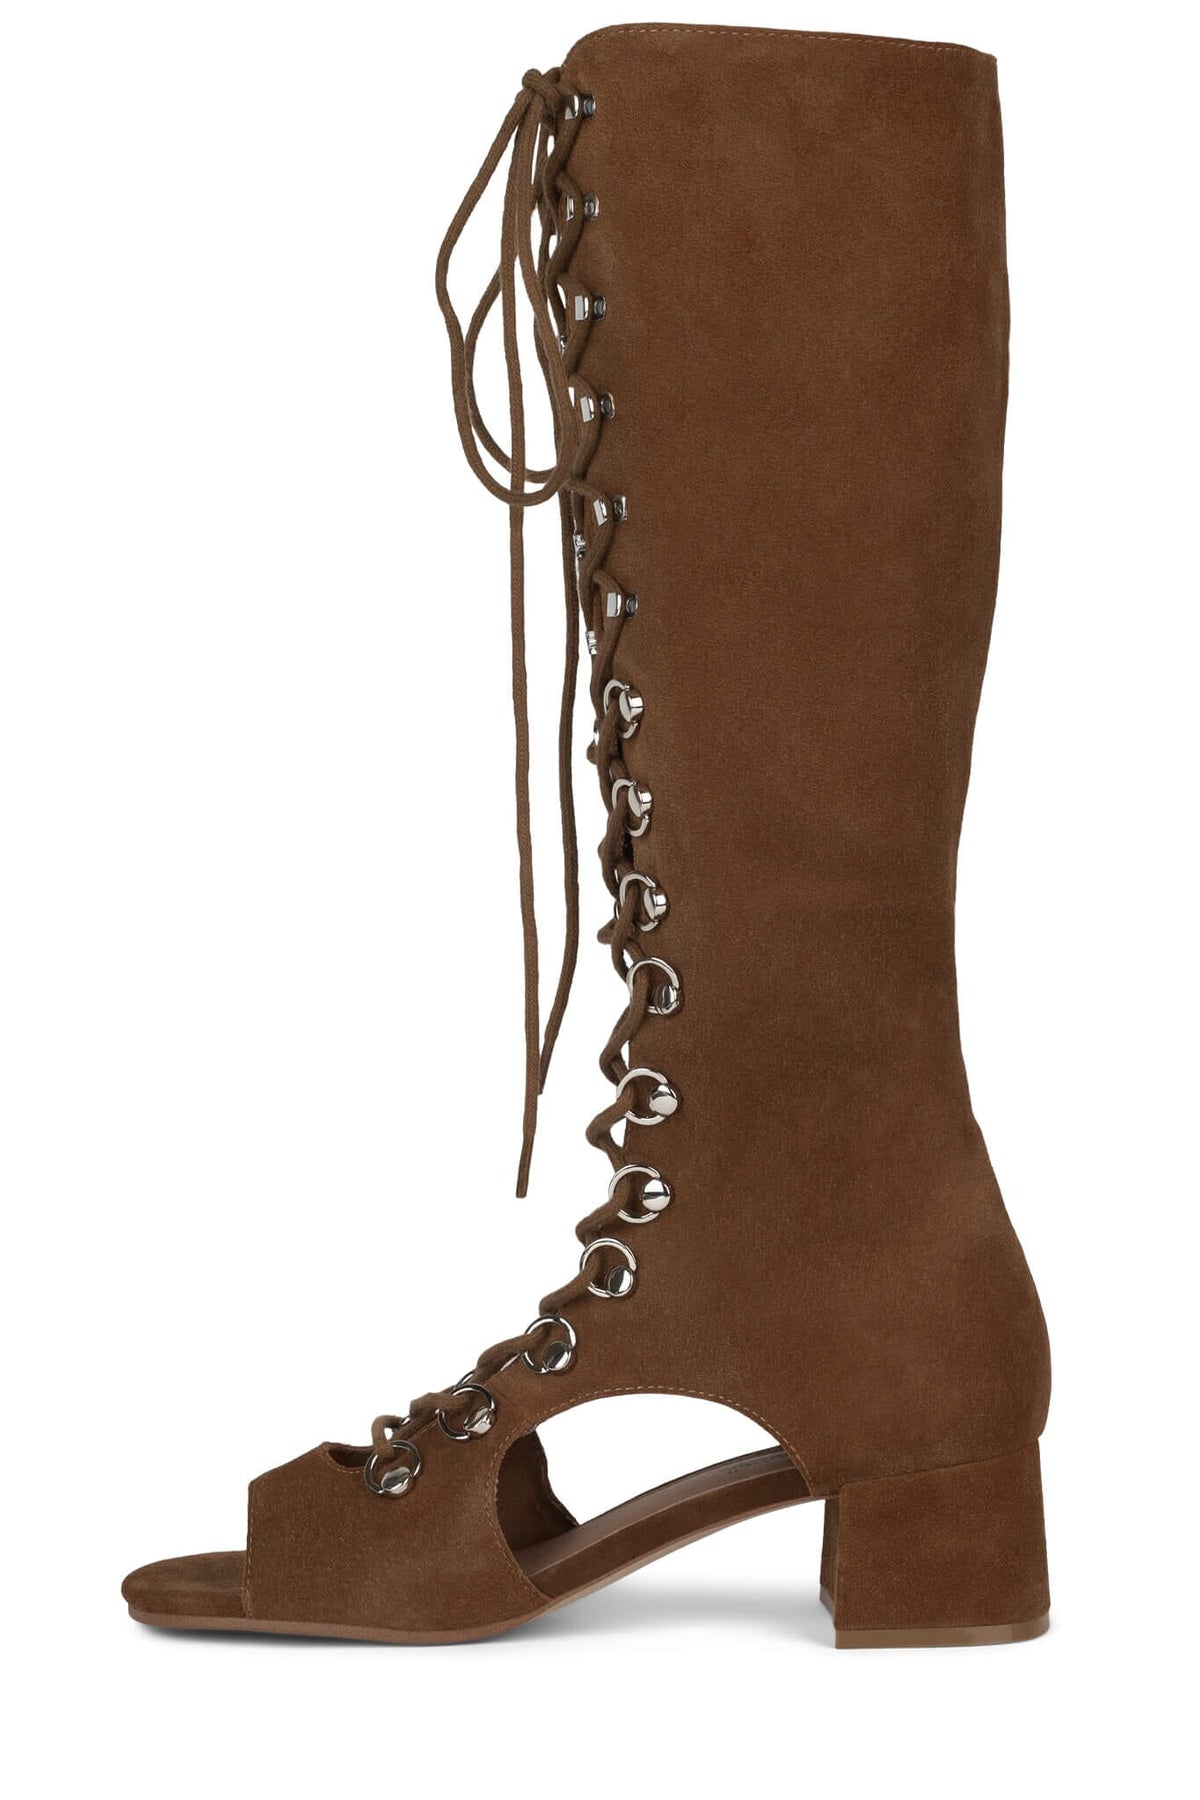 YE-YE Jeffrey Campbell Knee-High Boots Tan Suede